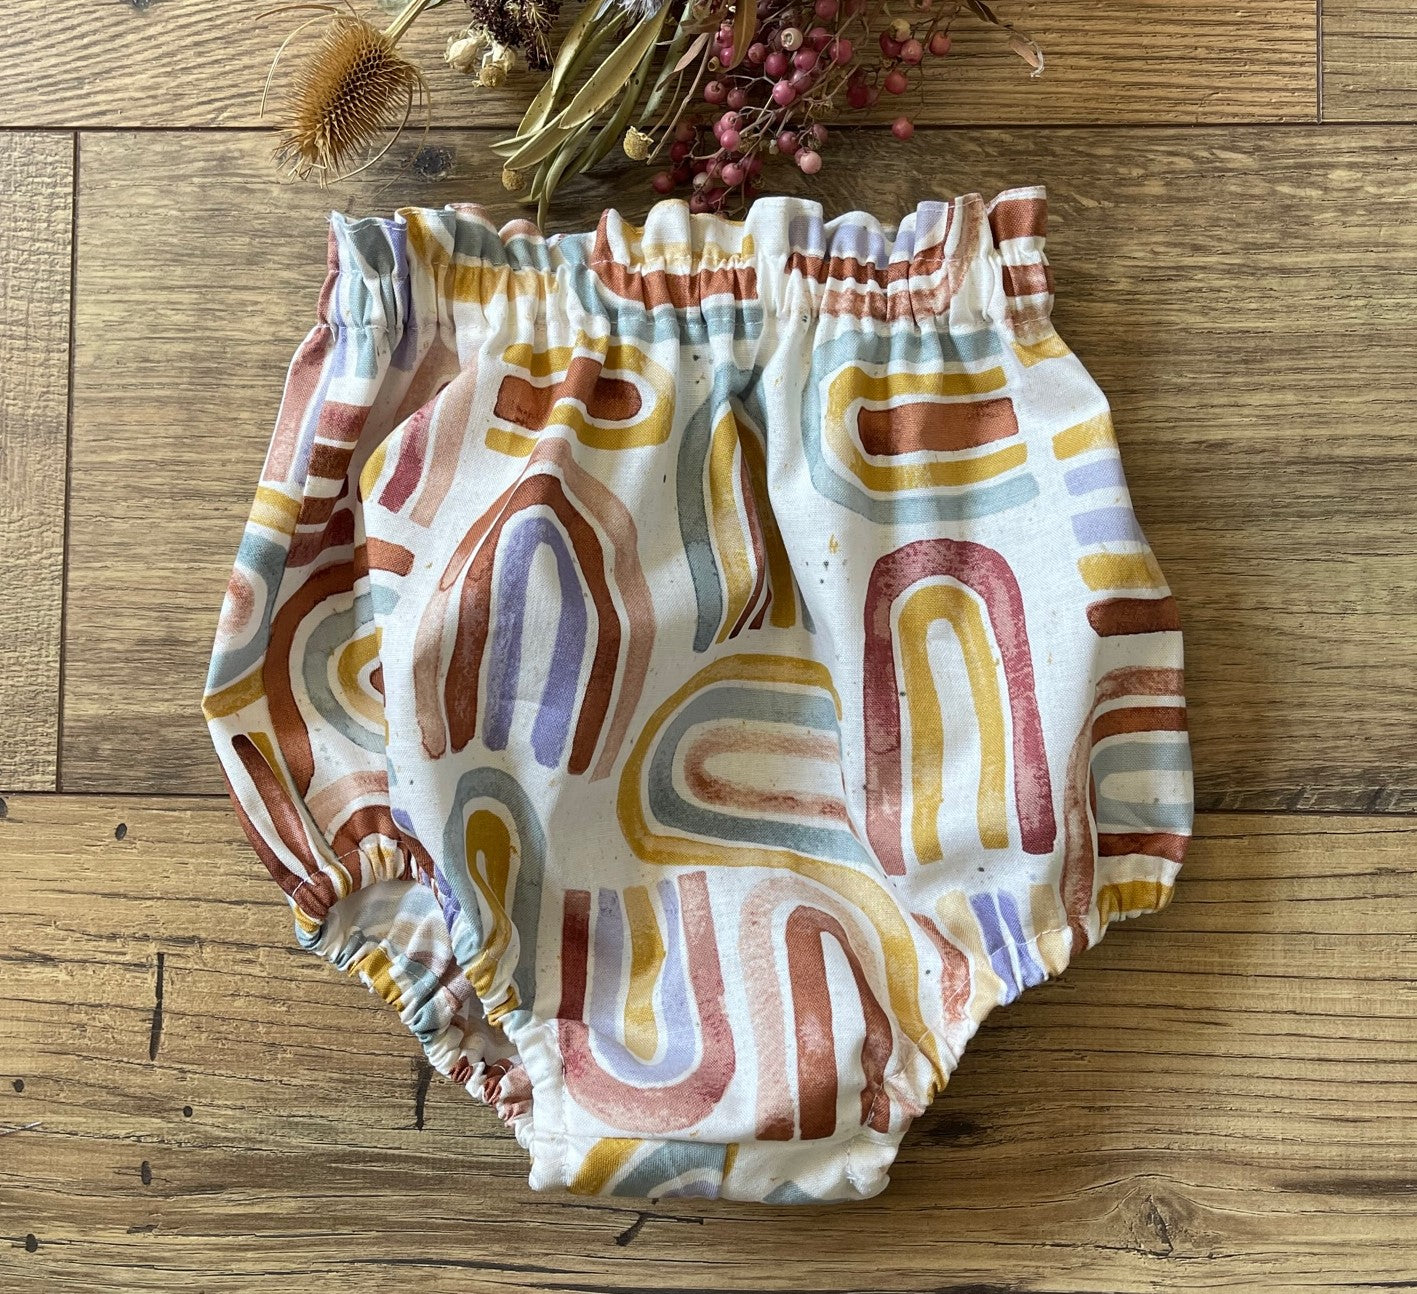 Boho Rainbow Baby Diaper Cover Infant & Toddler High Rise Bloomers